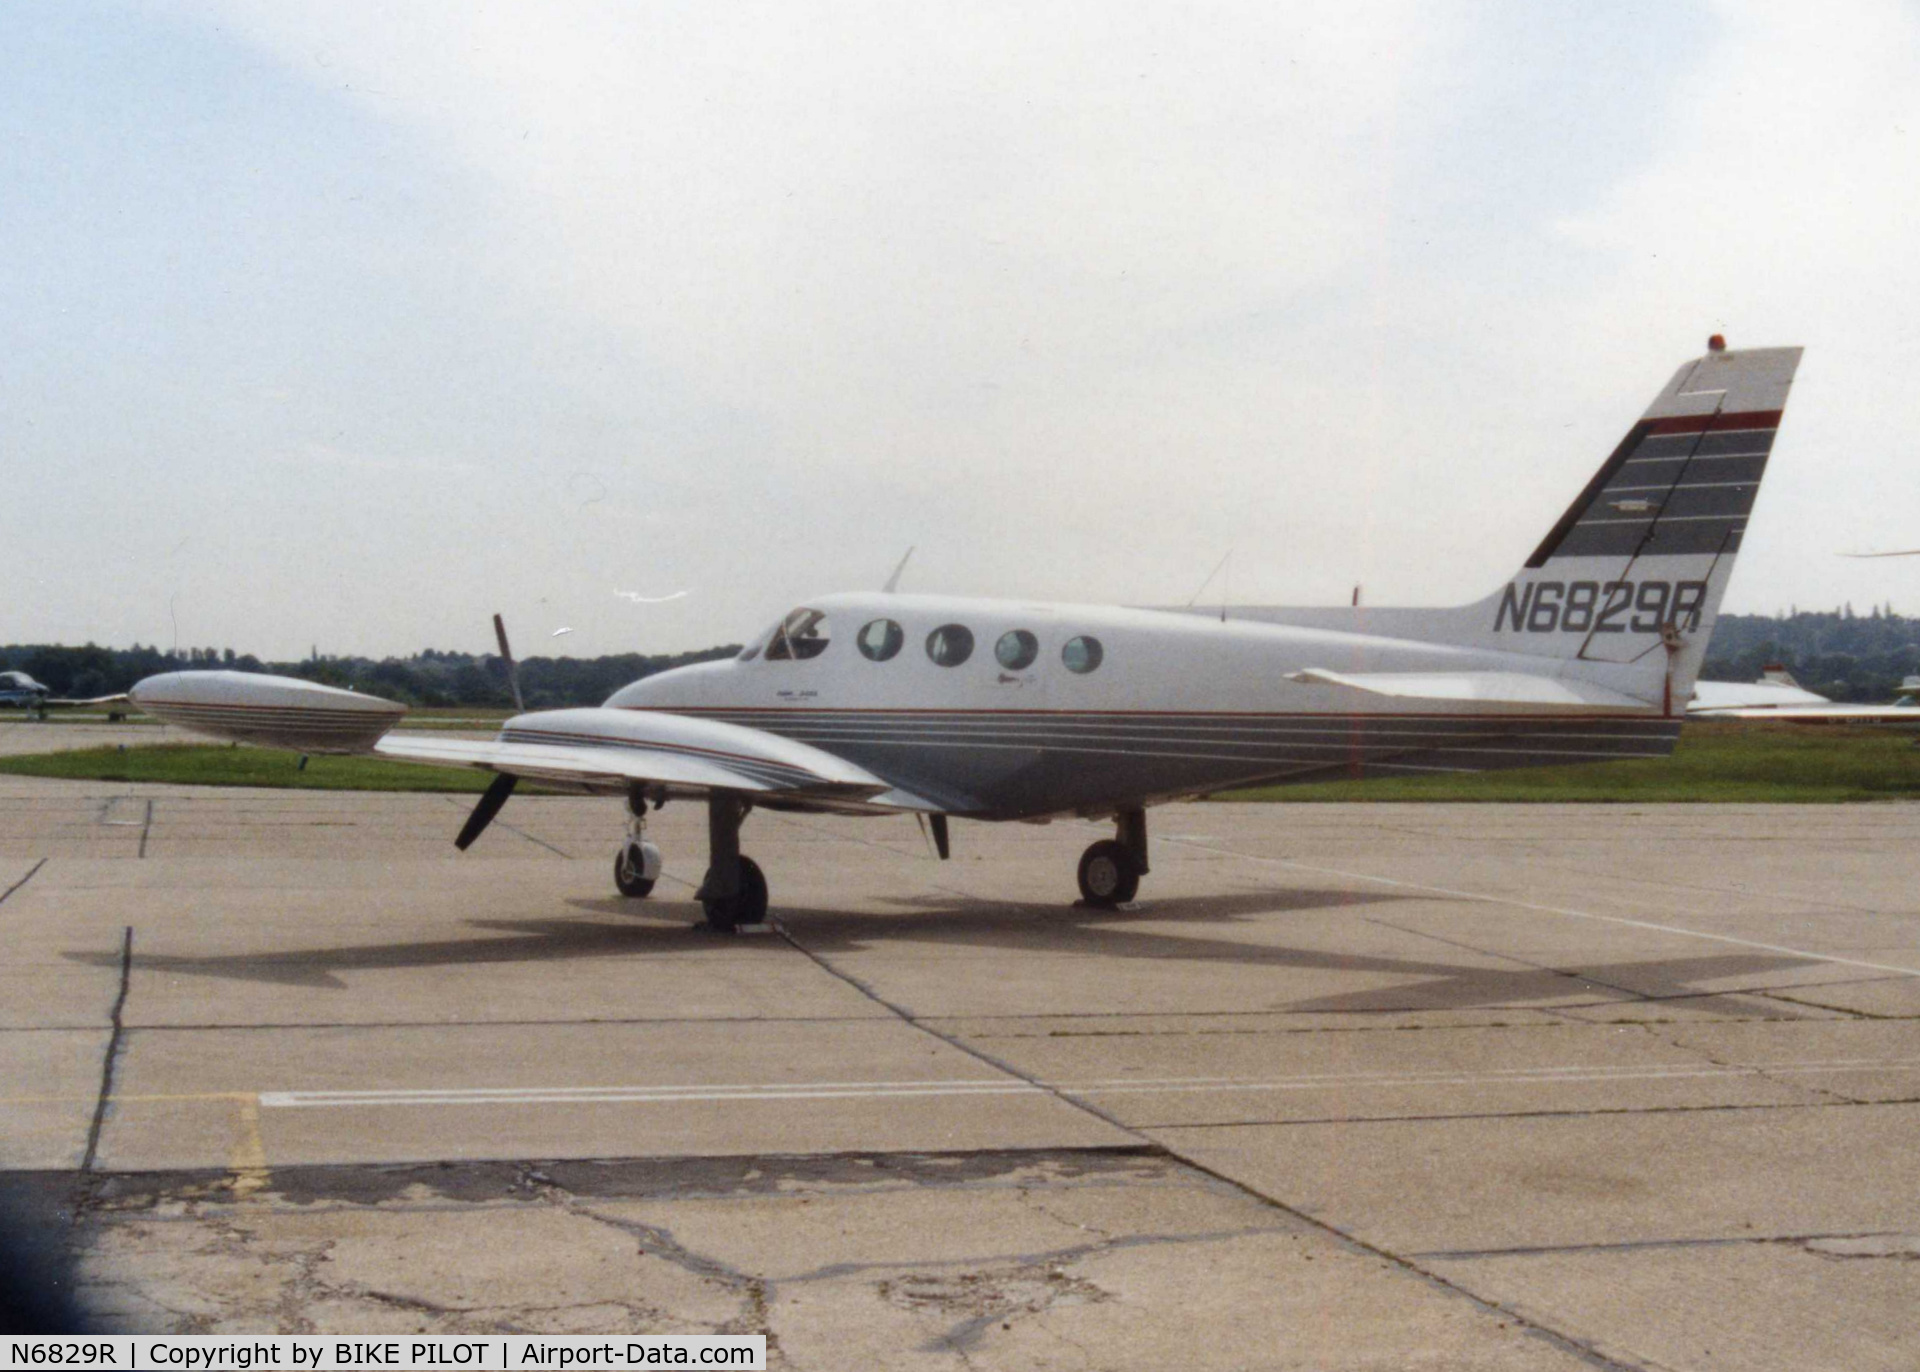 N6829R, 1981 Cessna 340A C/N 340A1236, MYSTERY SHIP, CAN FIND NO REFERENCE TO THIS REG. BELEIVE IT IS A CESSNA 340A. LOCATION SOUTHERN UK DATE UNKNOWN